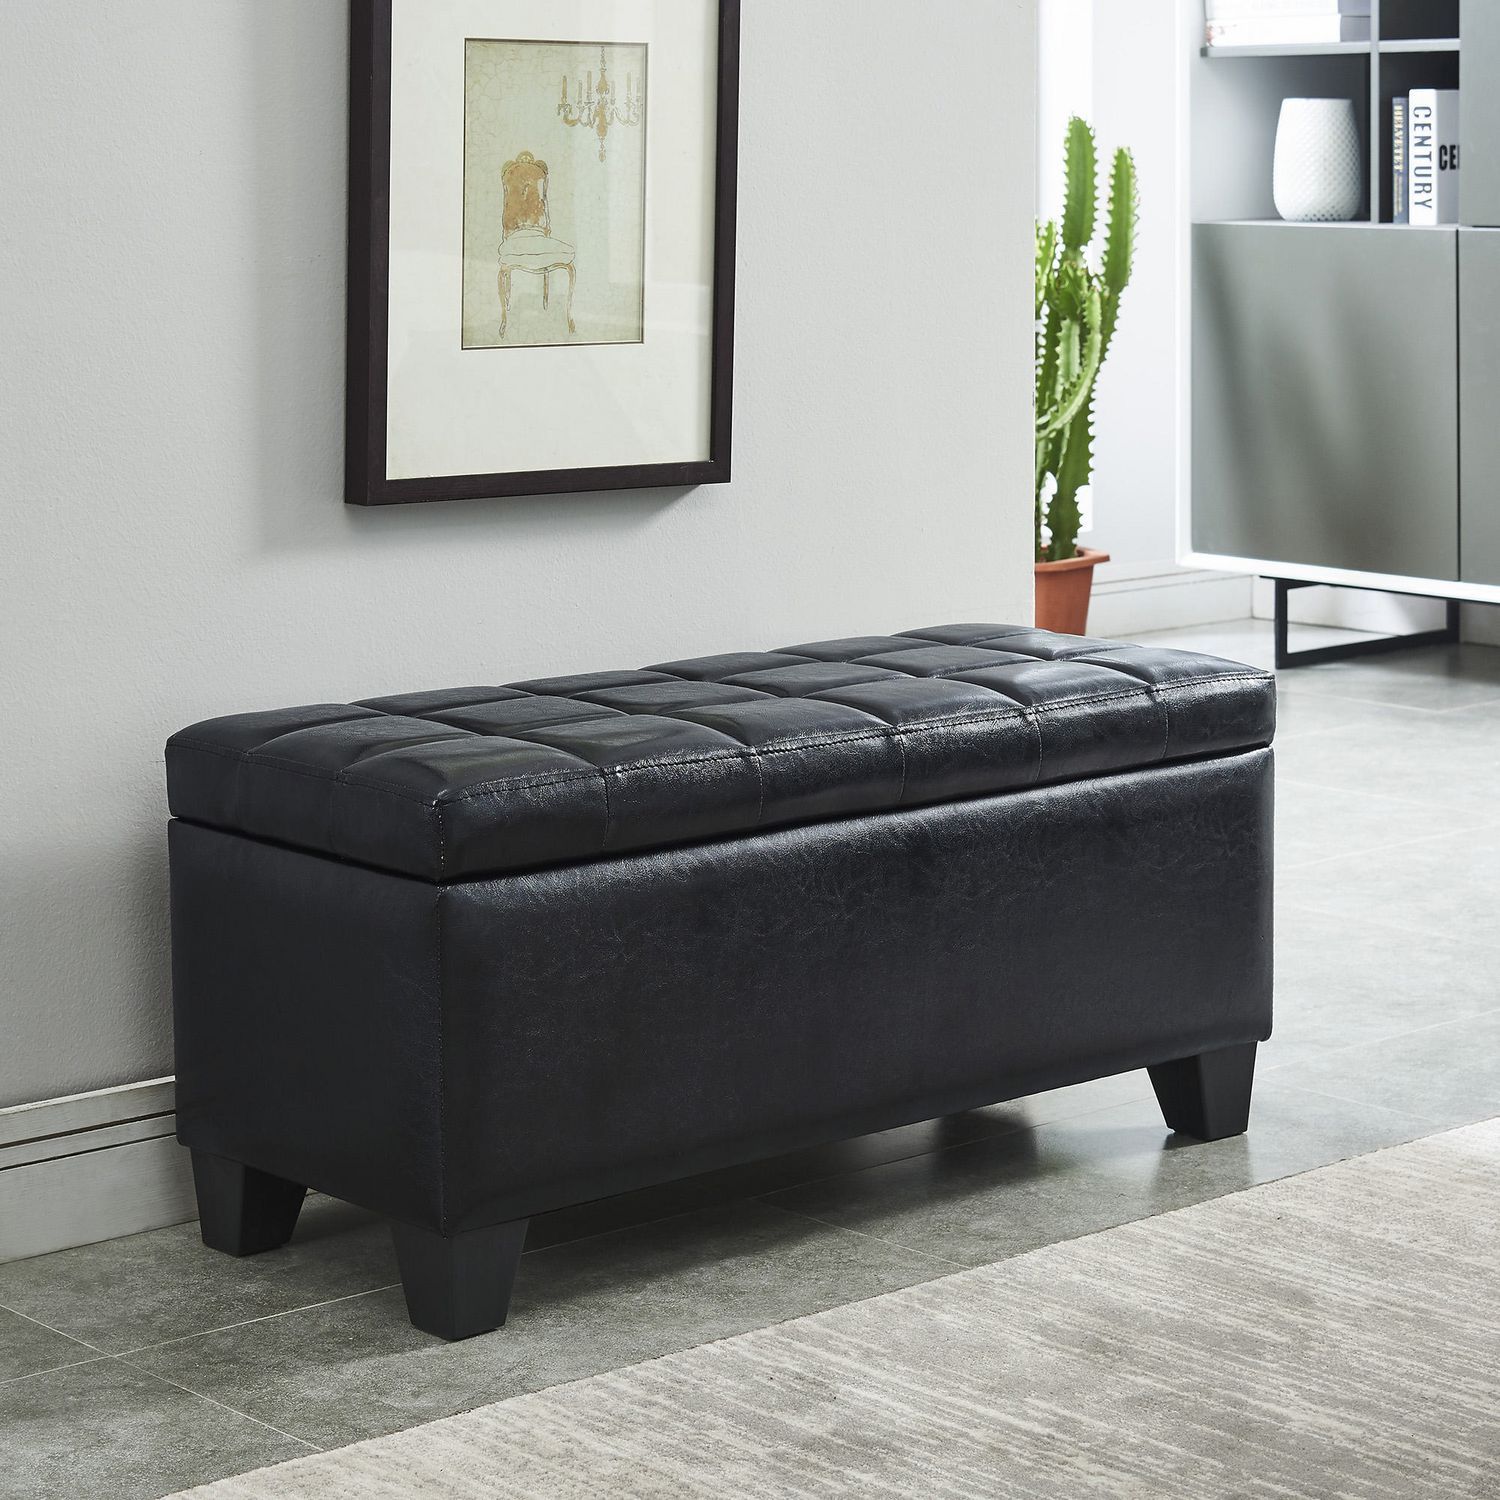 Worldwide Homefurnishings Inc Faux Leather Storage Ottoman  Black | Walmart  Canada With Black Faux Leather Ottomans (View 14 of 15)